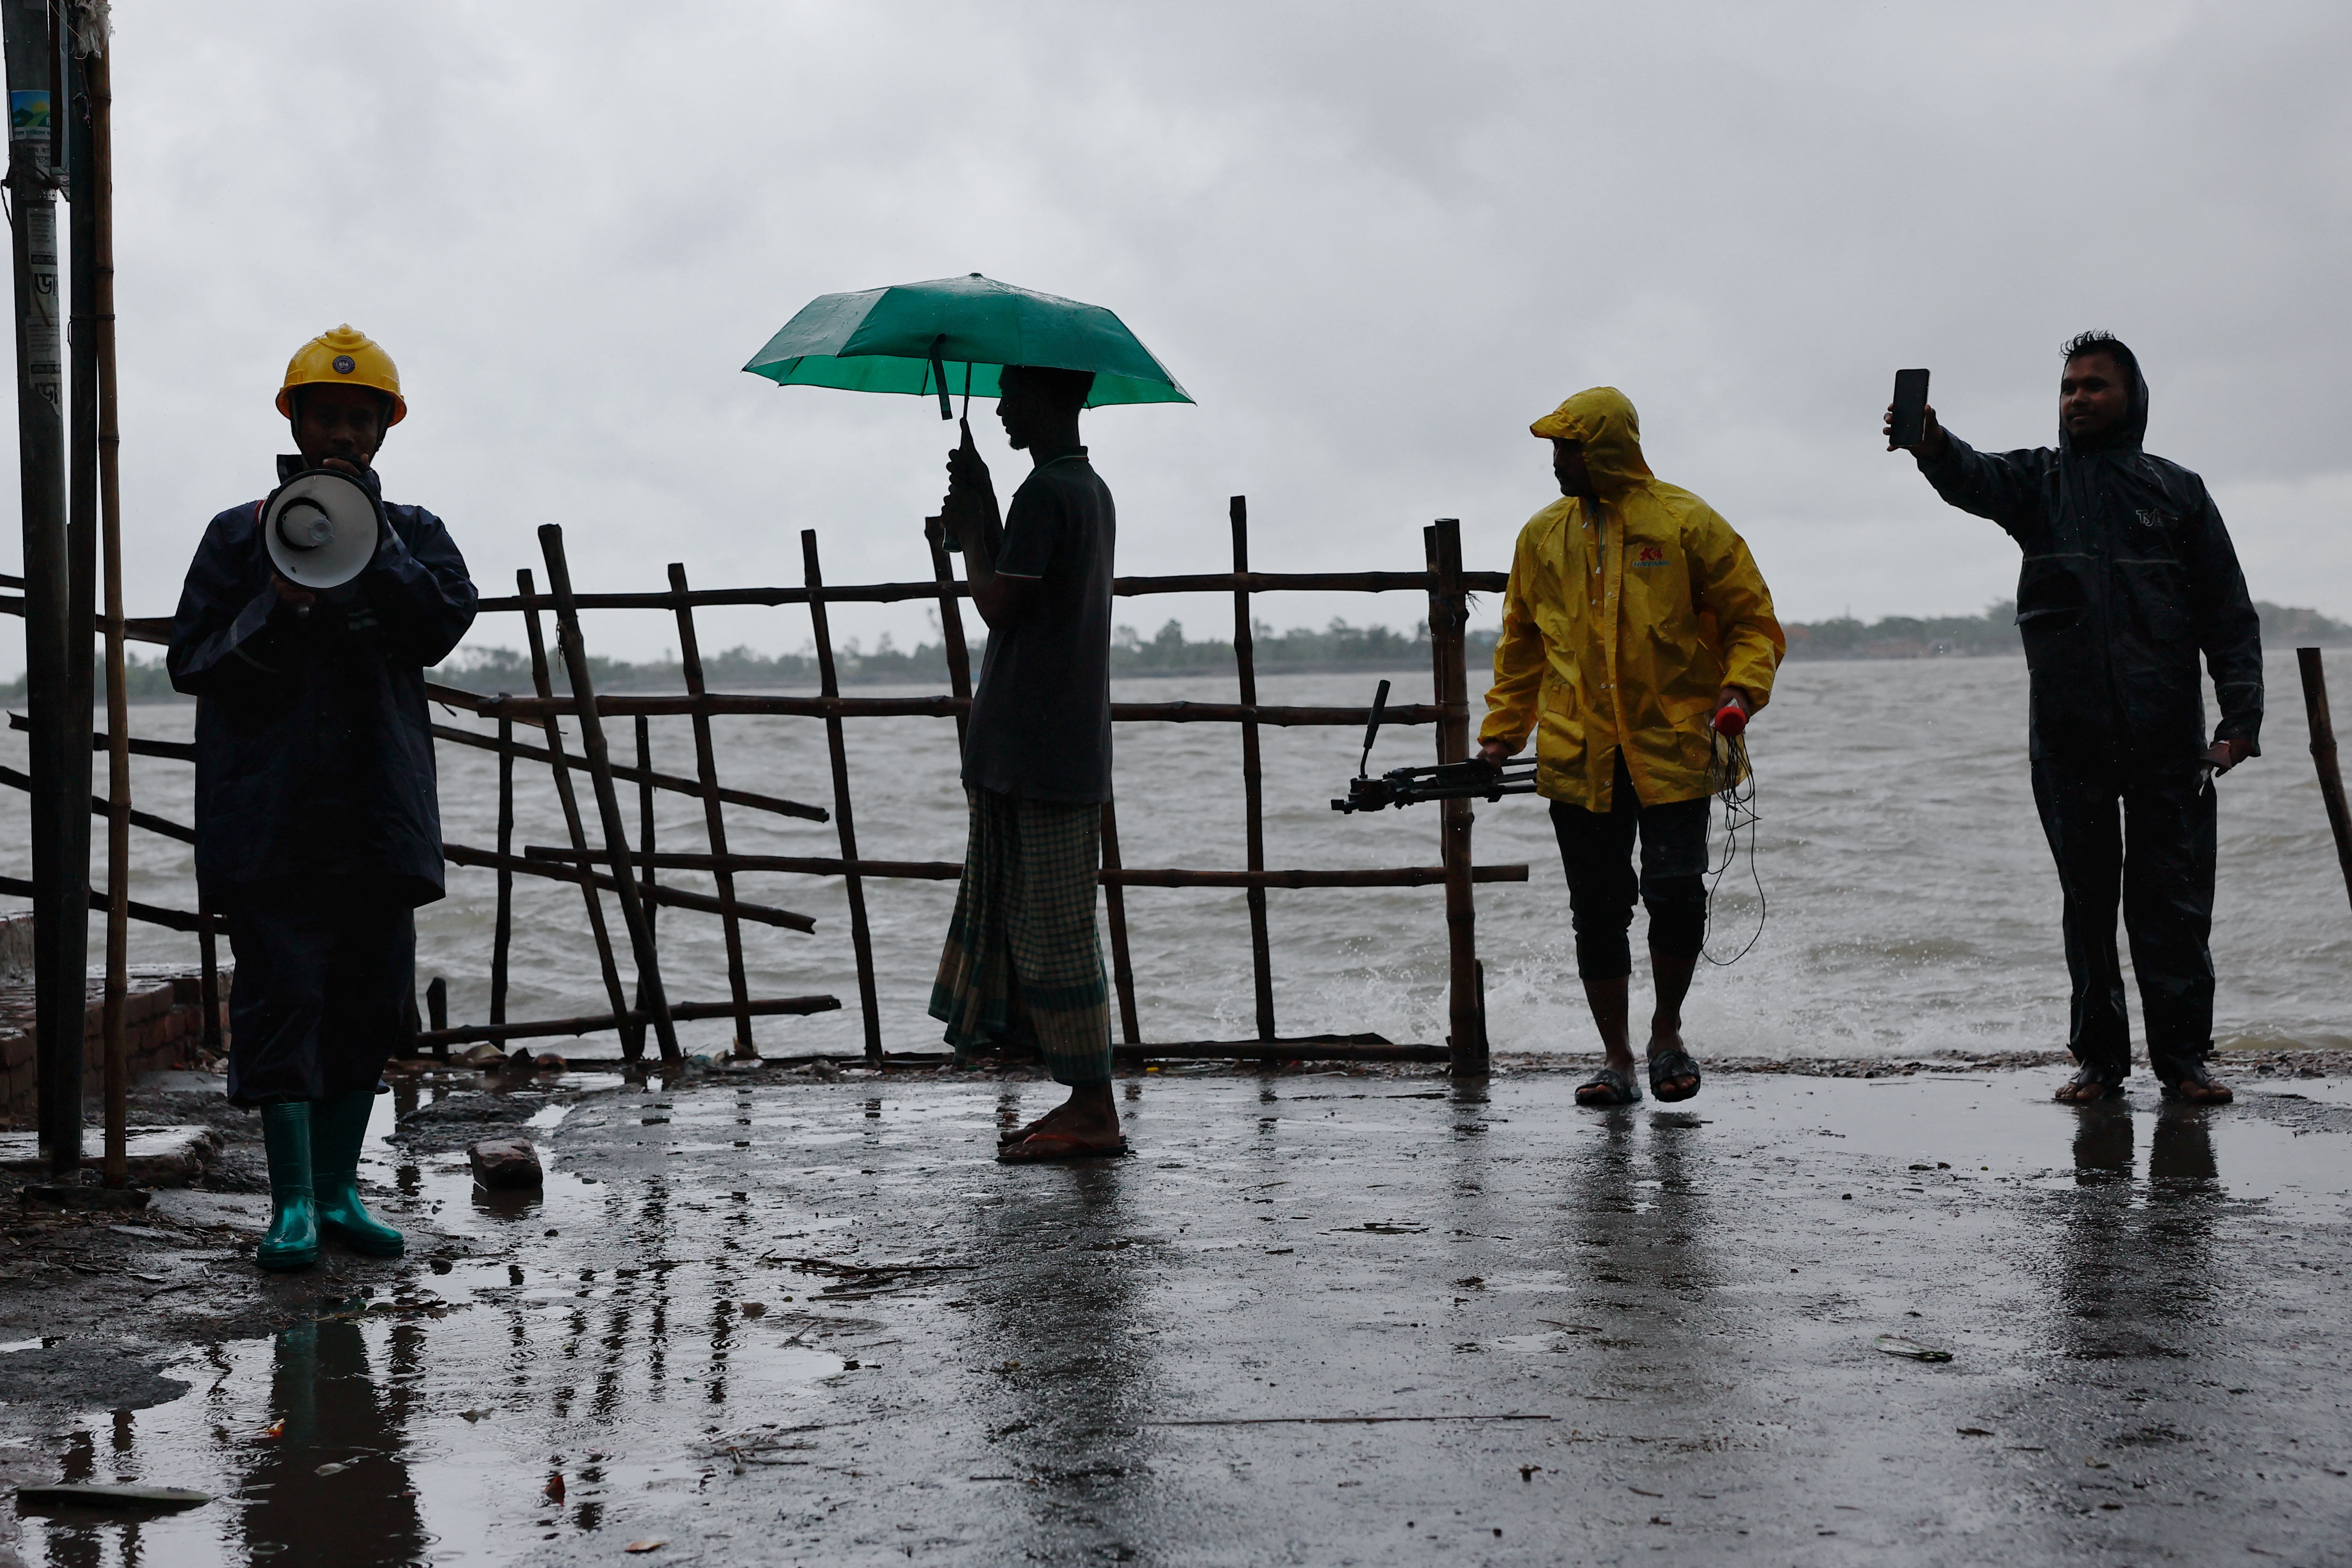 People stand on the bank of Kholpetua river while a volunteer alerts people before the Cyclone Remal hits the country in the Shyamnagar area of Satkhira